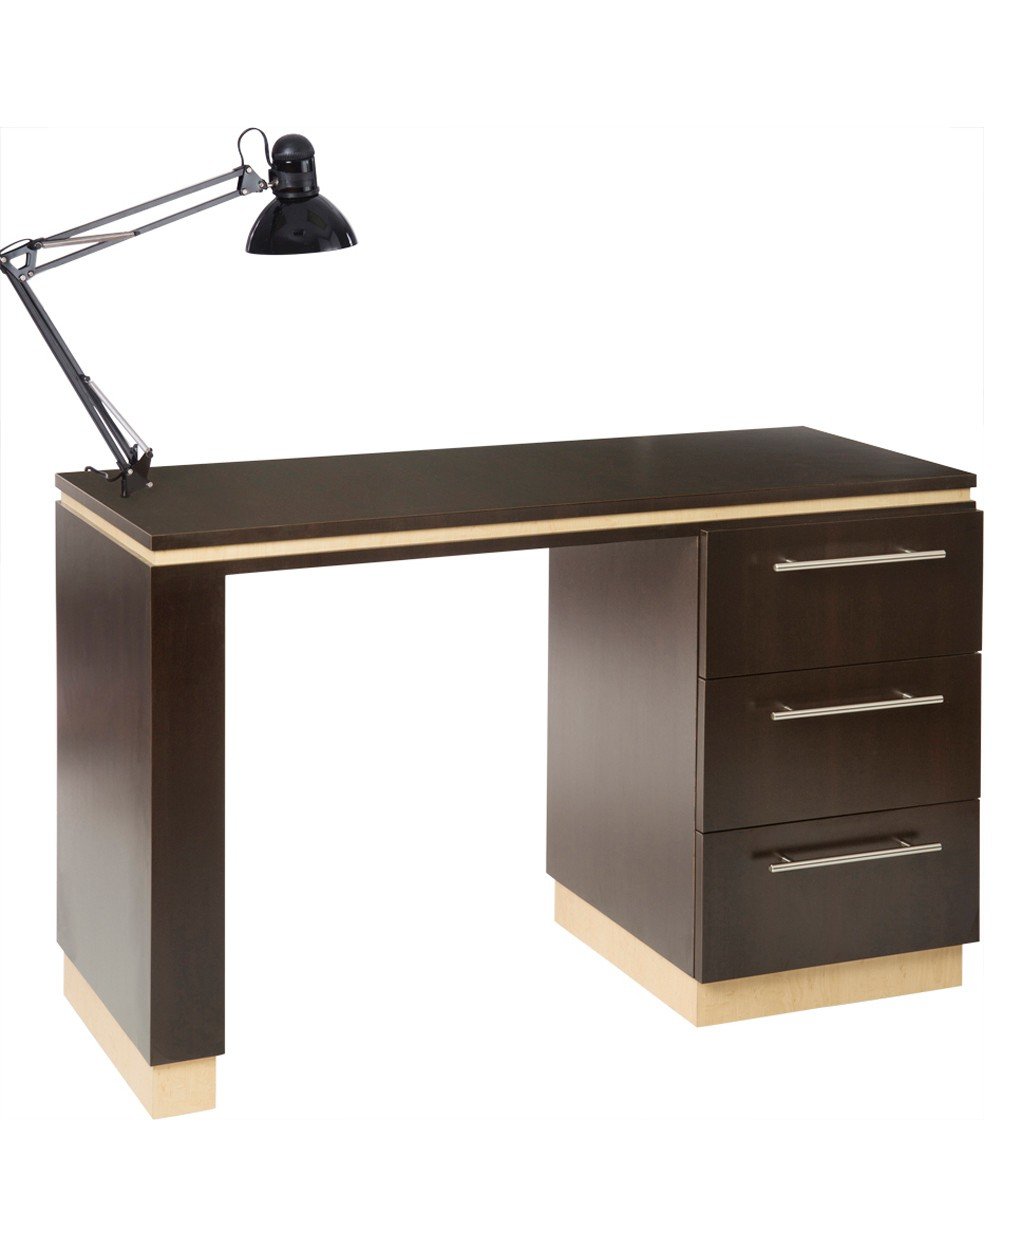 Bali Manicure Table With Lamp